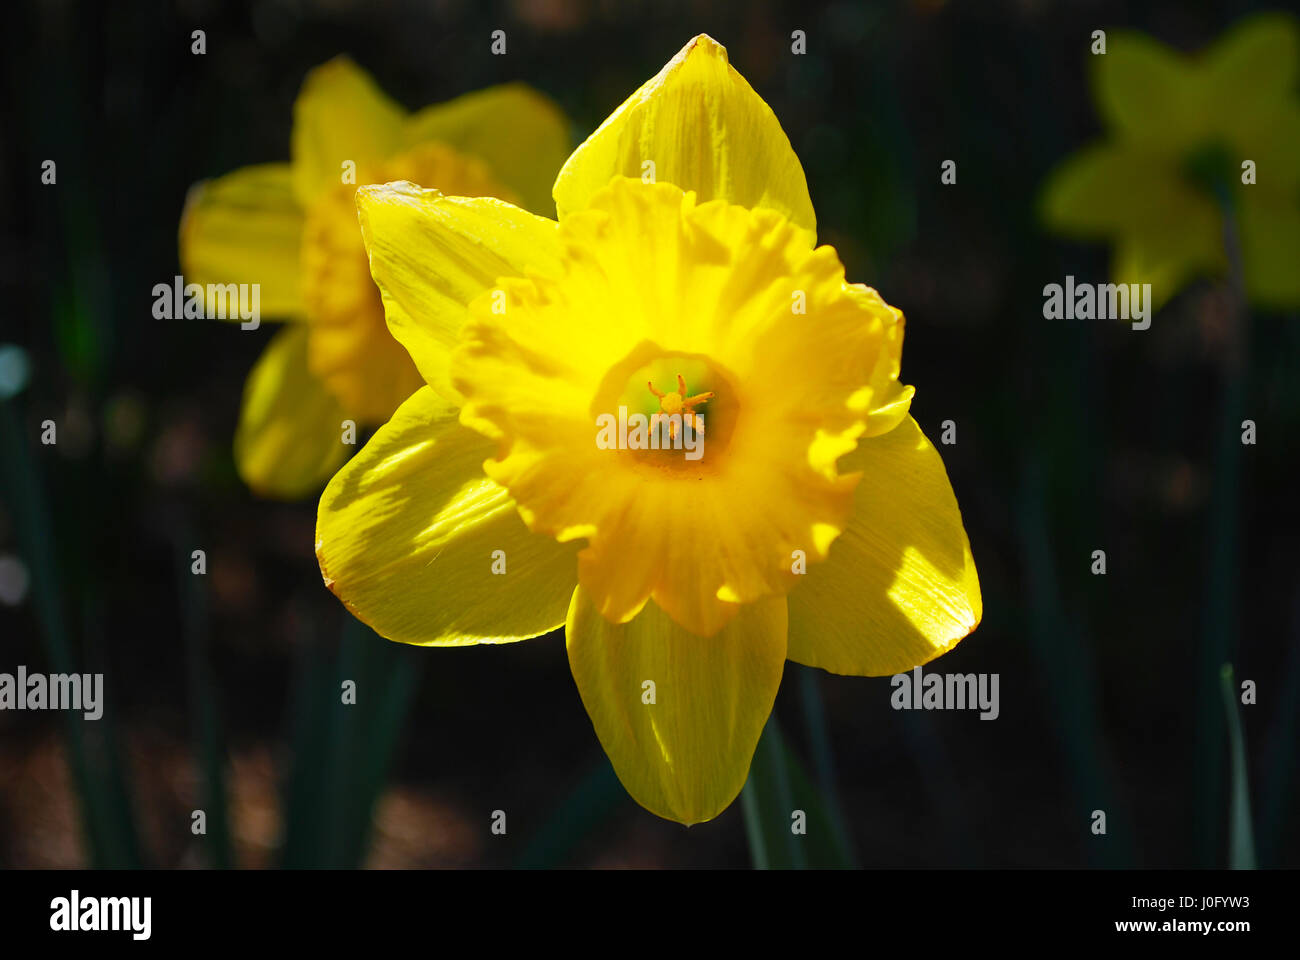 An Imperfect Daffodil in Bloom Stock Photo